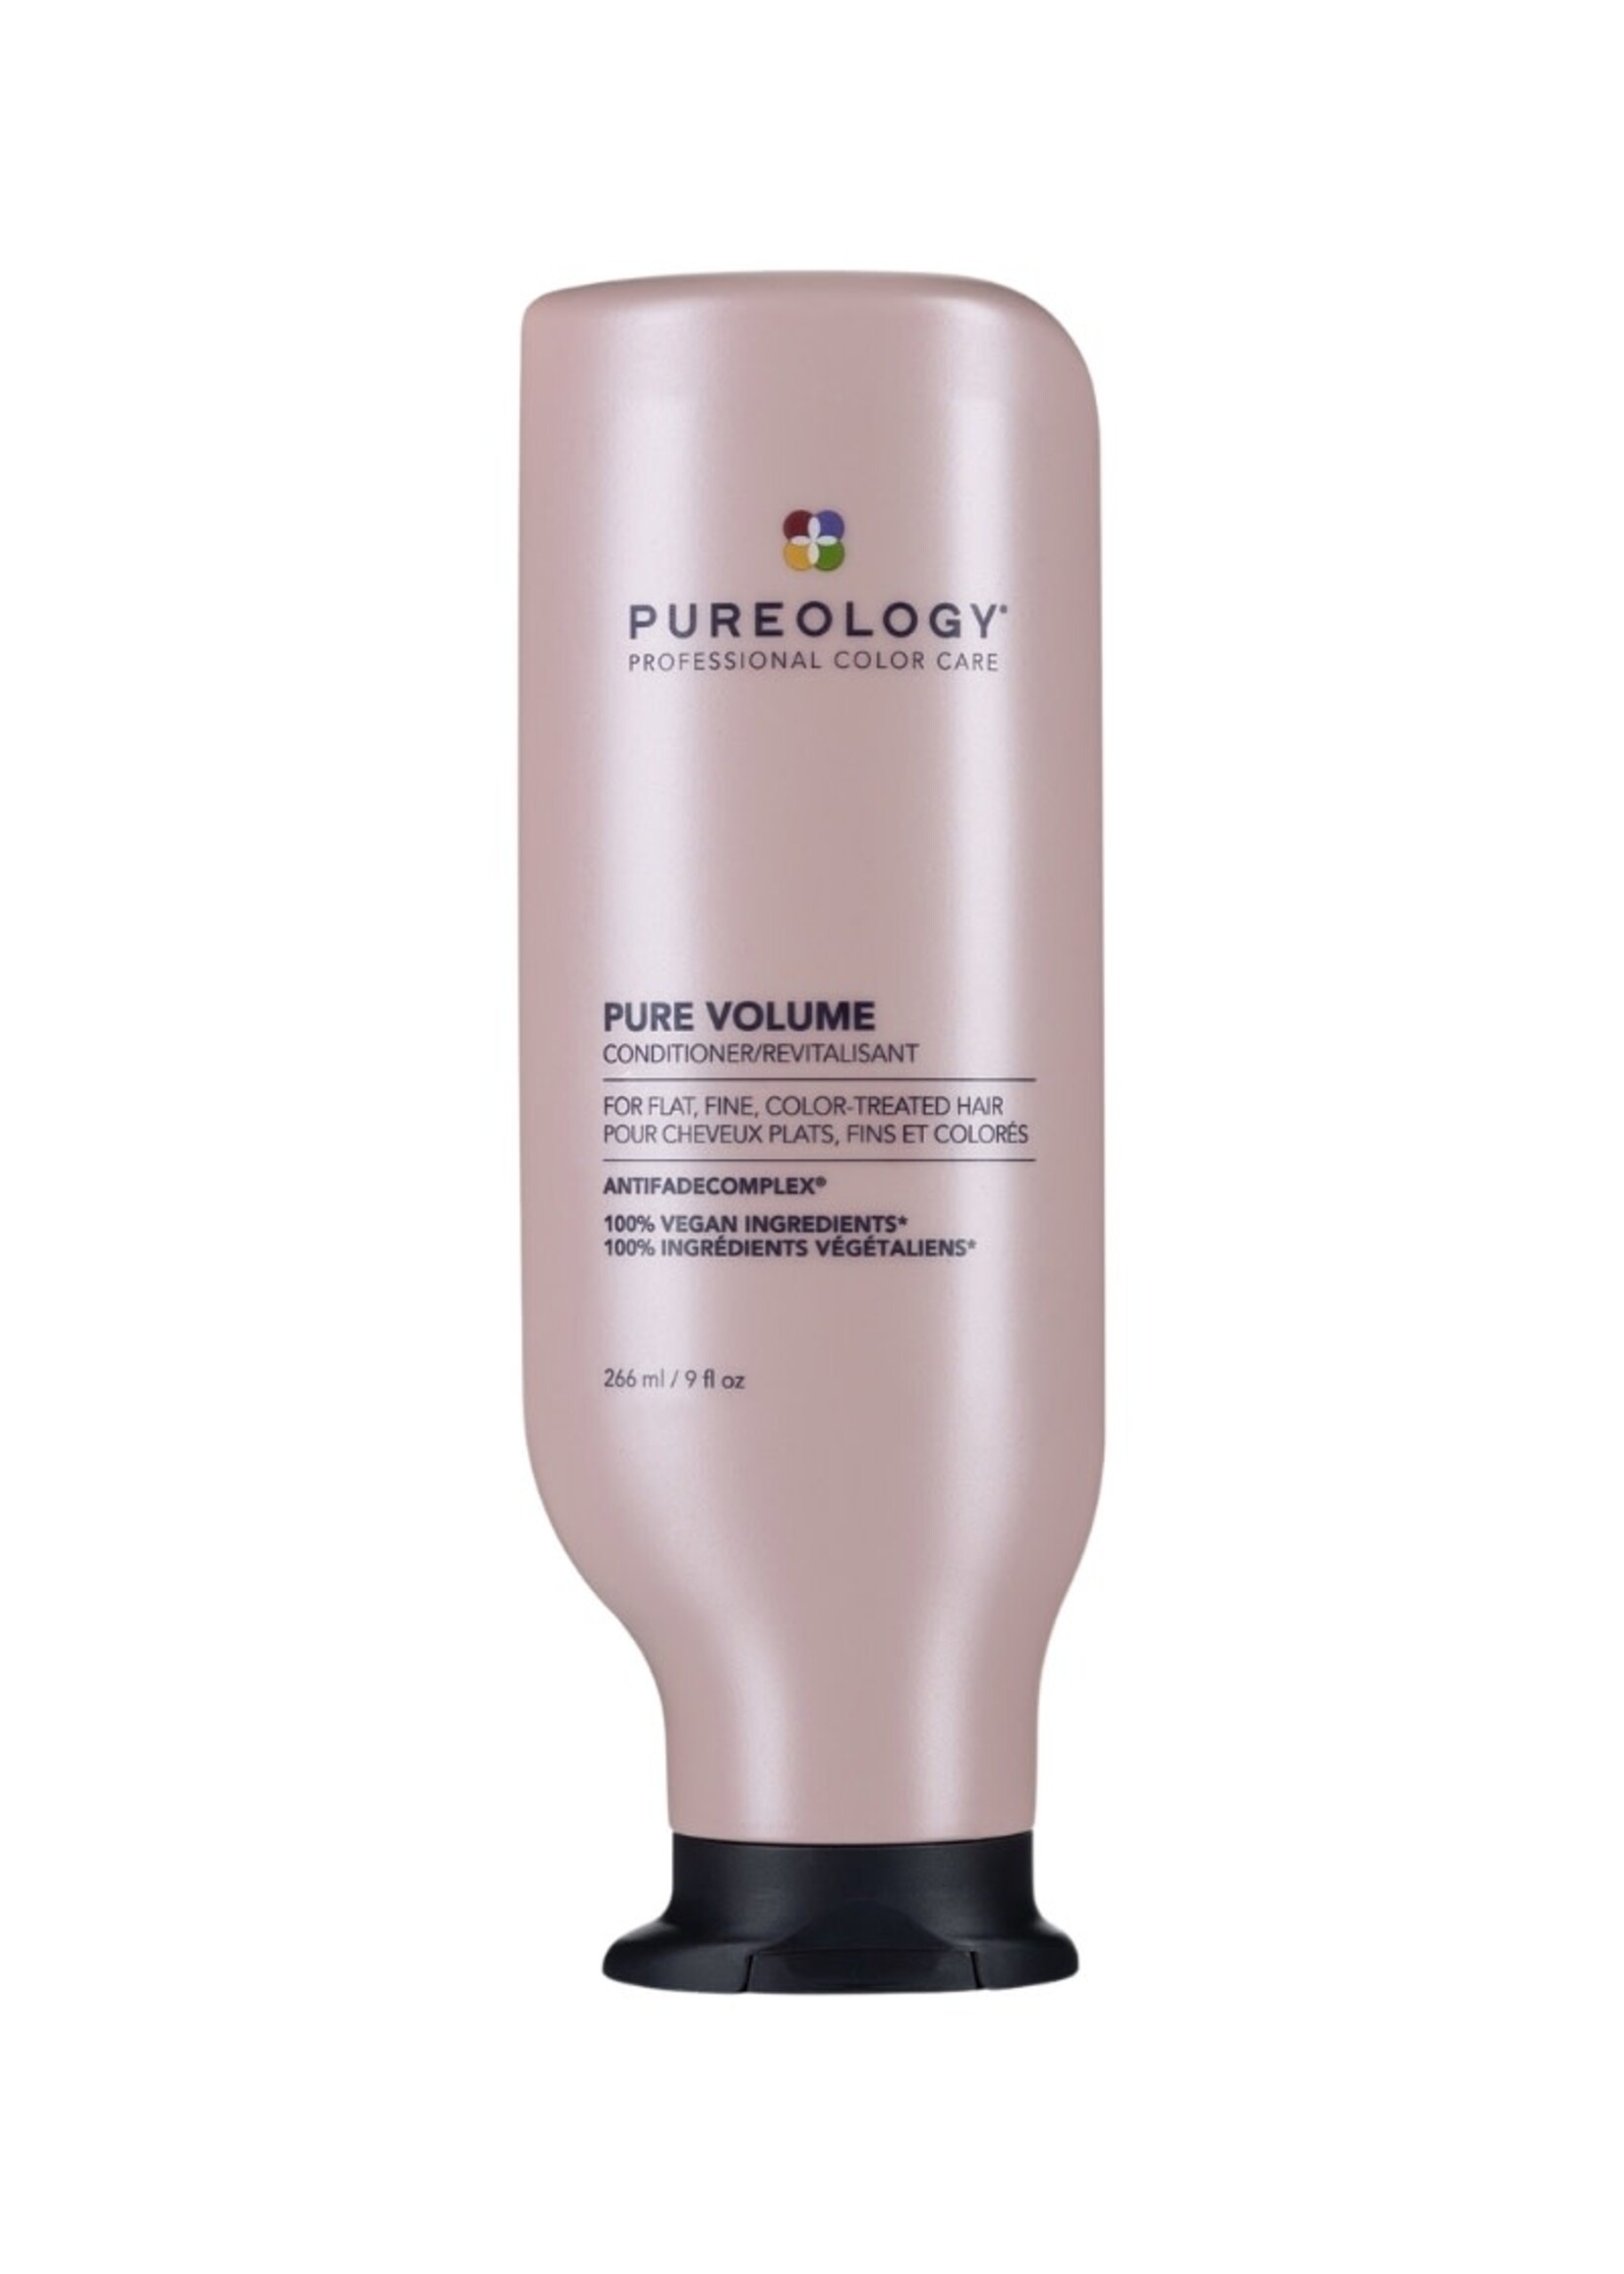 Pureology Pureology Pure Volume Conditioner 266ml